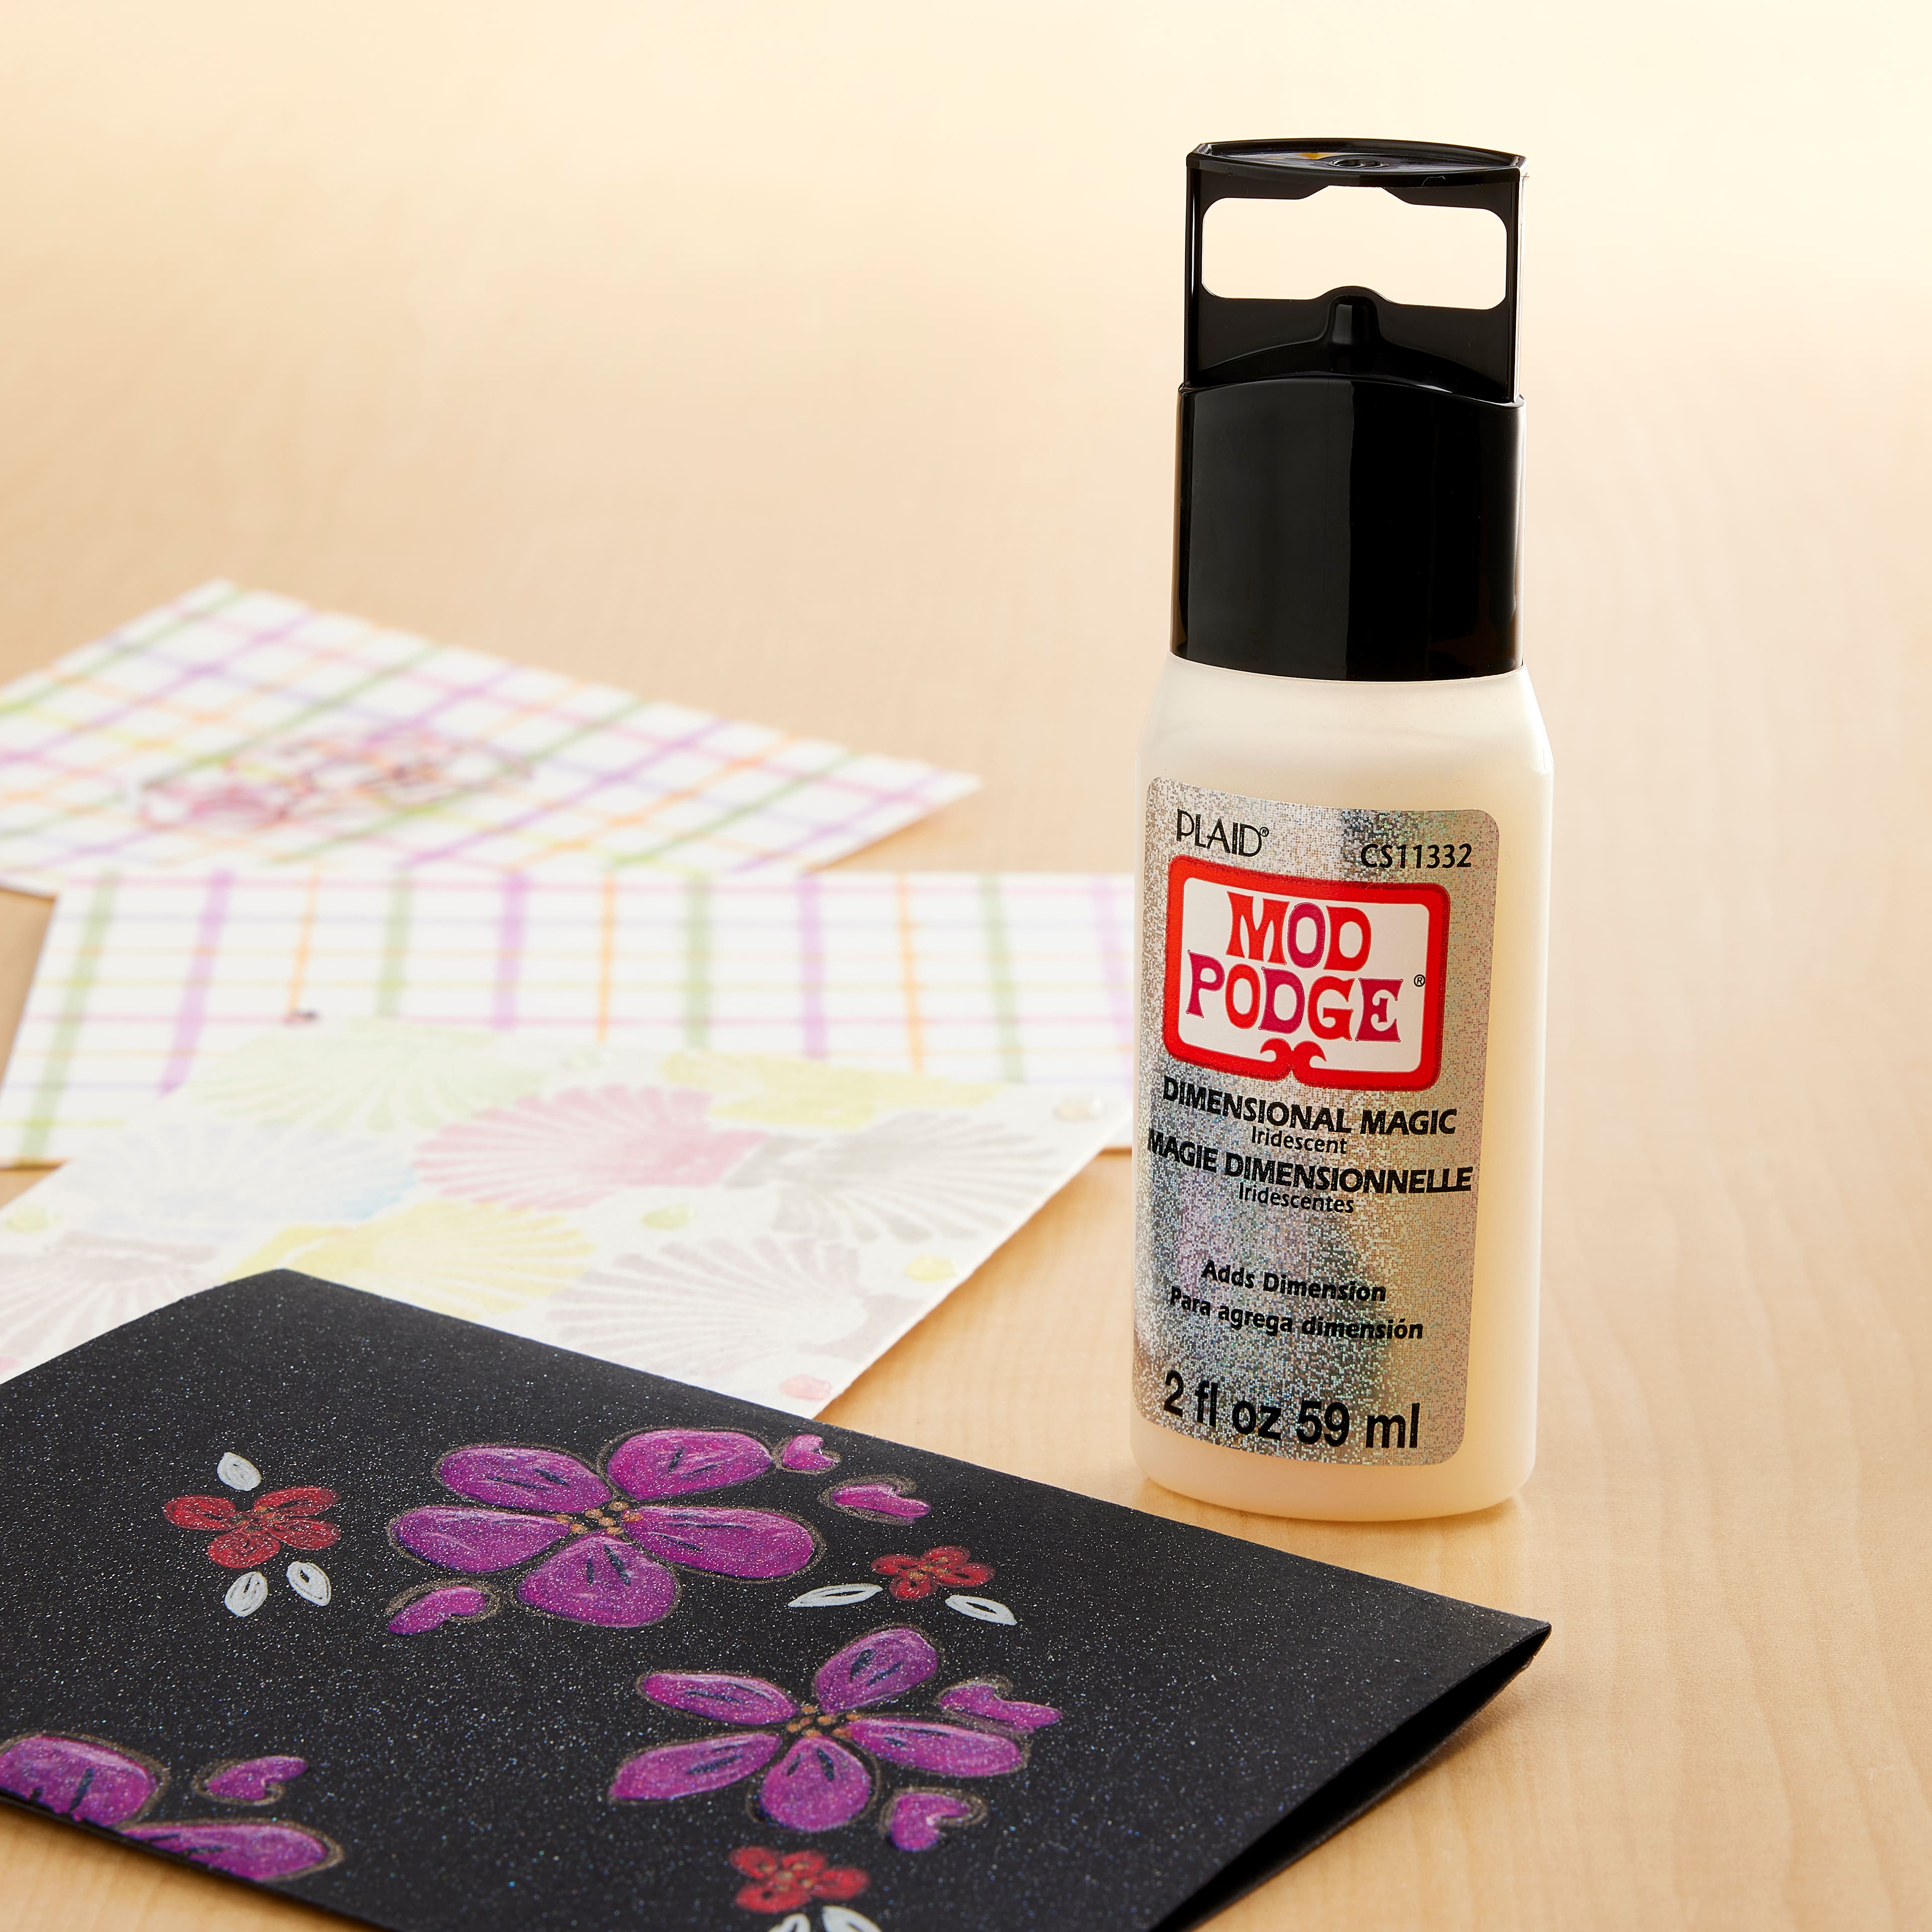 Plaid Mod Podge Dimensional Magic 59ml - Card Making & Paper Crafting from  Crafty Arts UK